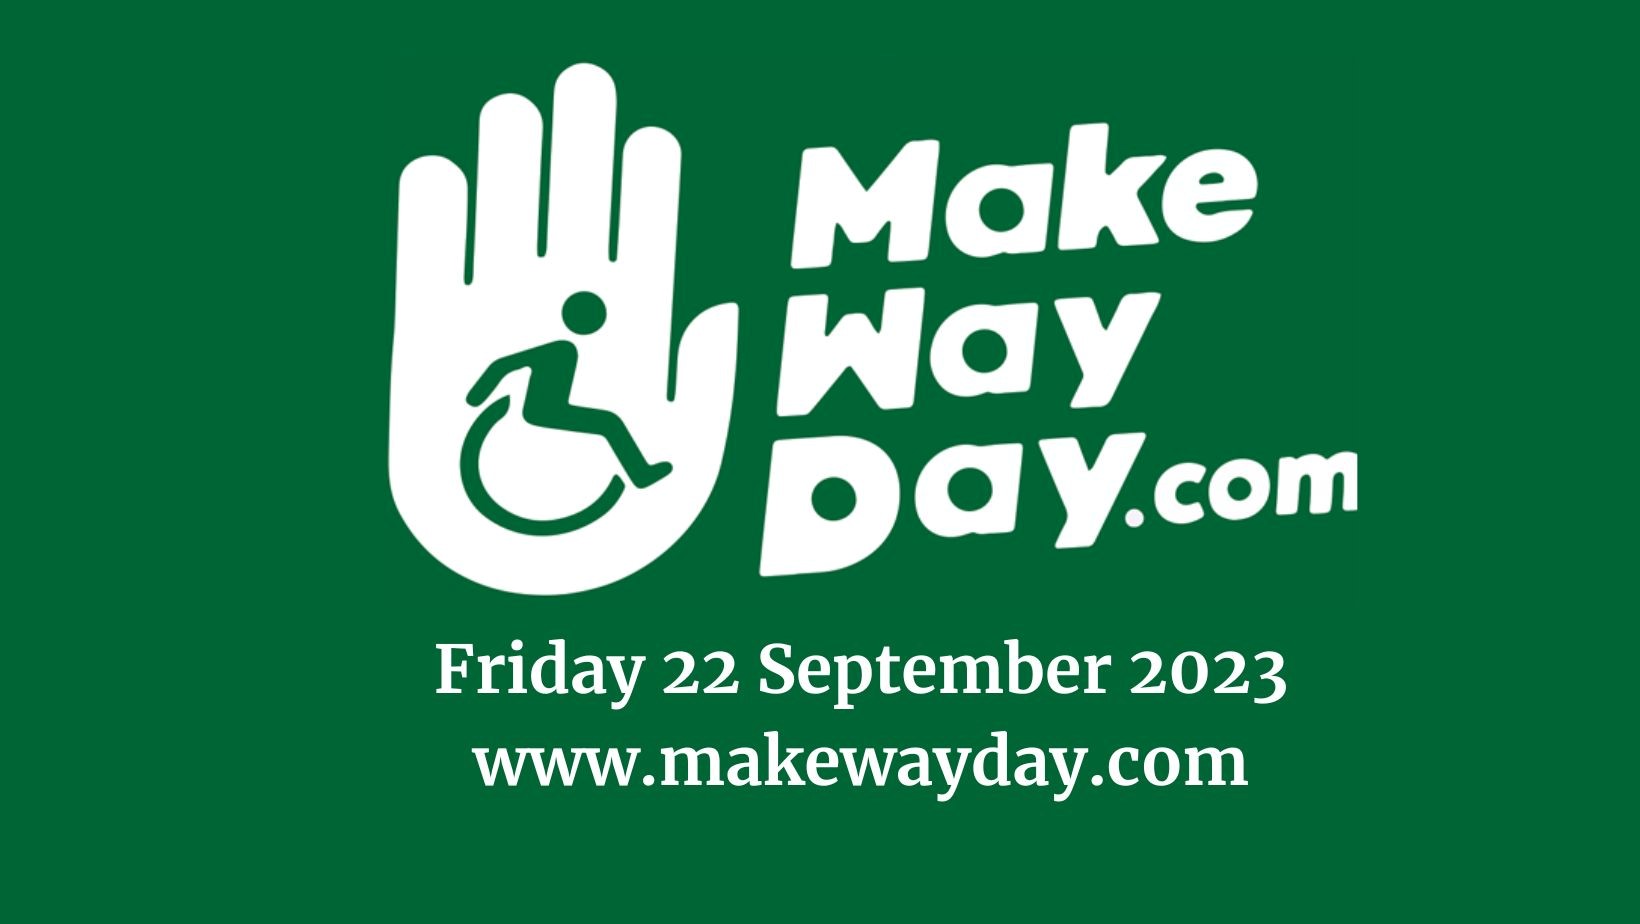 Make Way Day is coming to a street where you live on Friday 22 September 2023 